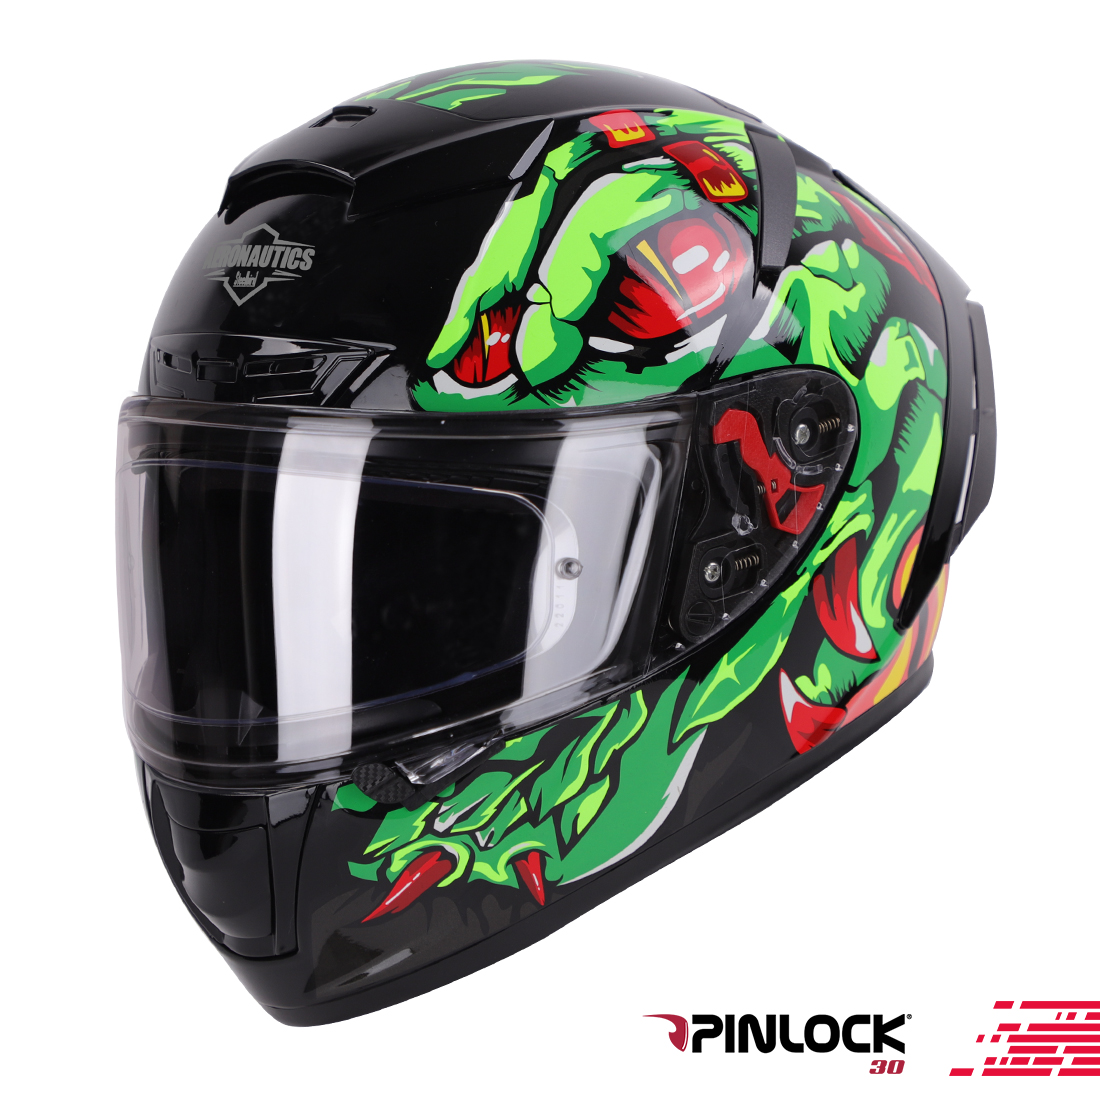 Steelbird SA-5 Monster ISI/DOT Certified Full Face Graphic Helmet With Outer Anti-Fog Clear Visor (Glossy Black Green)